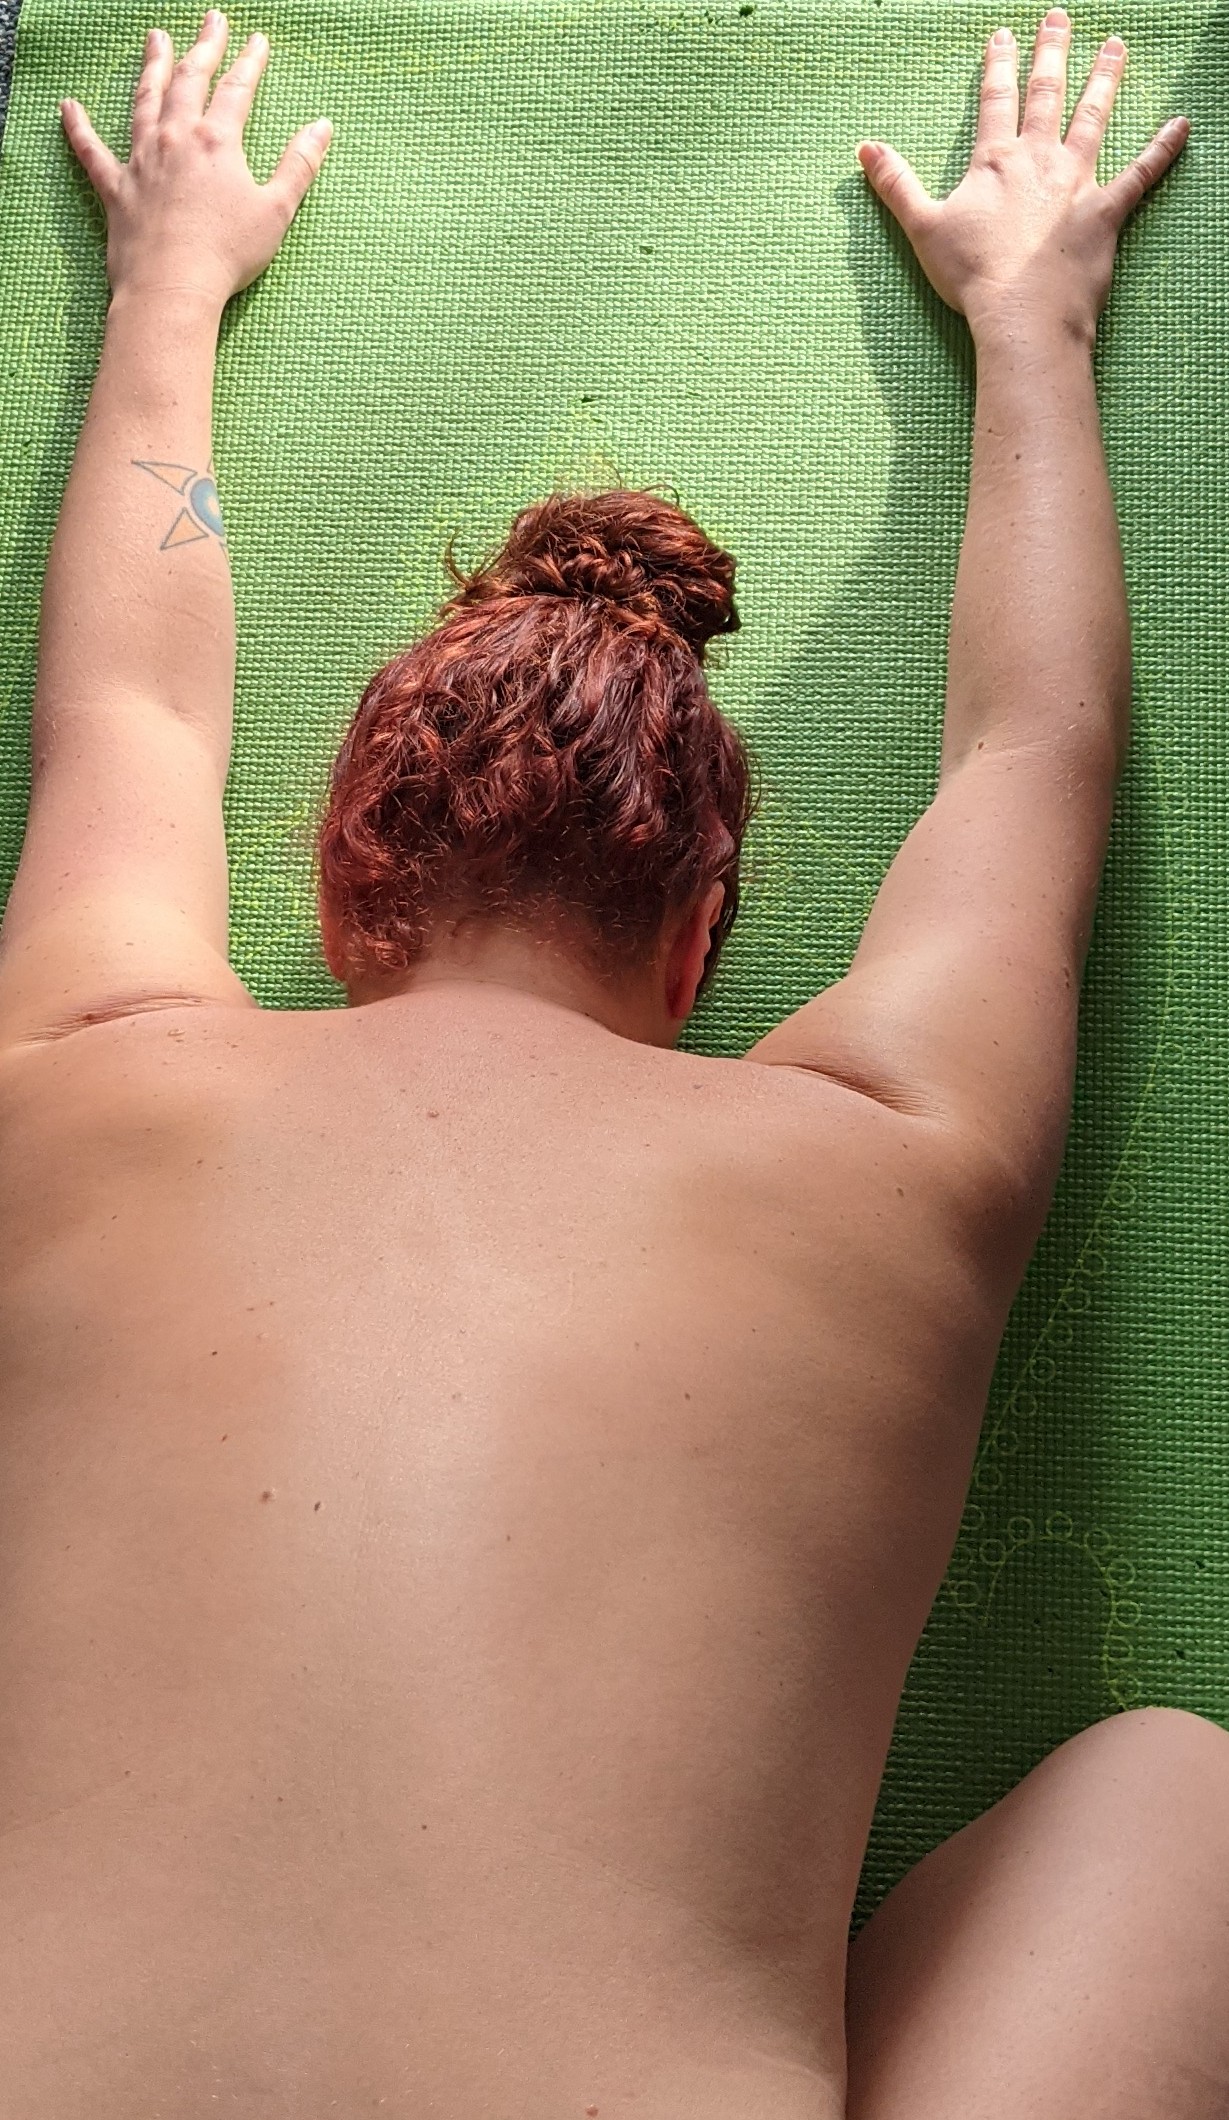 Nikki in Child's pose on a yoga mat